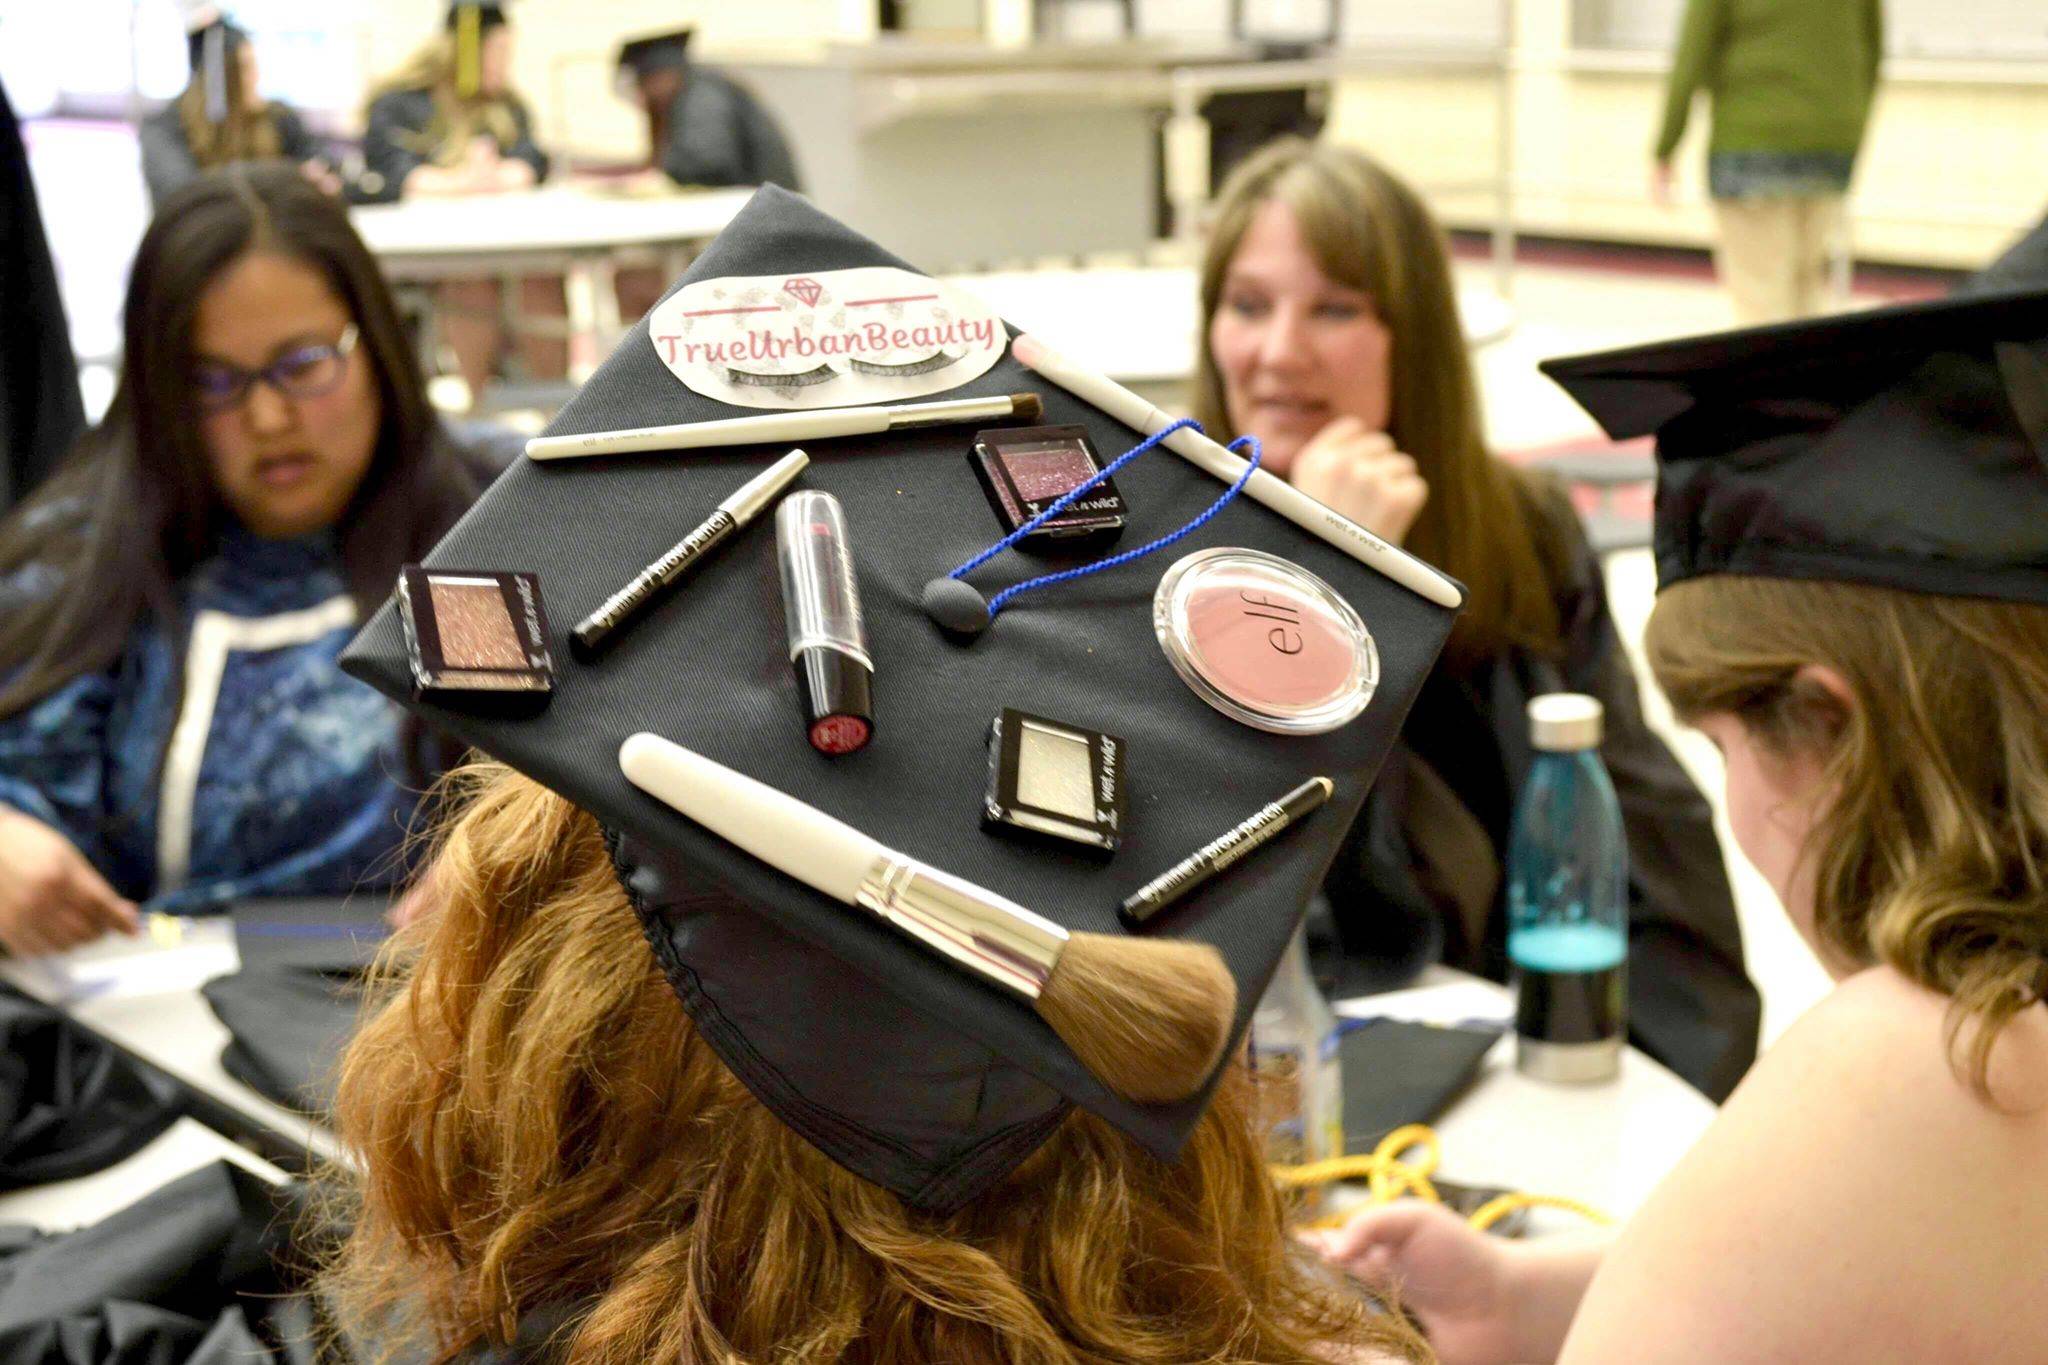 Kenai Peninsula College’s Kenai River Campus graduate Rachel Jamison gets ready to walk the stage and receive her associate’s of arts degree on Thursday, May 9, 2019, at Kenai Central High School in Kenai, Alaska. (Photo by Victoria Petersen/Peninsula Clarion)